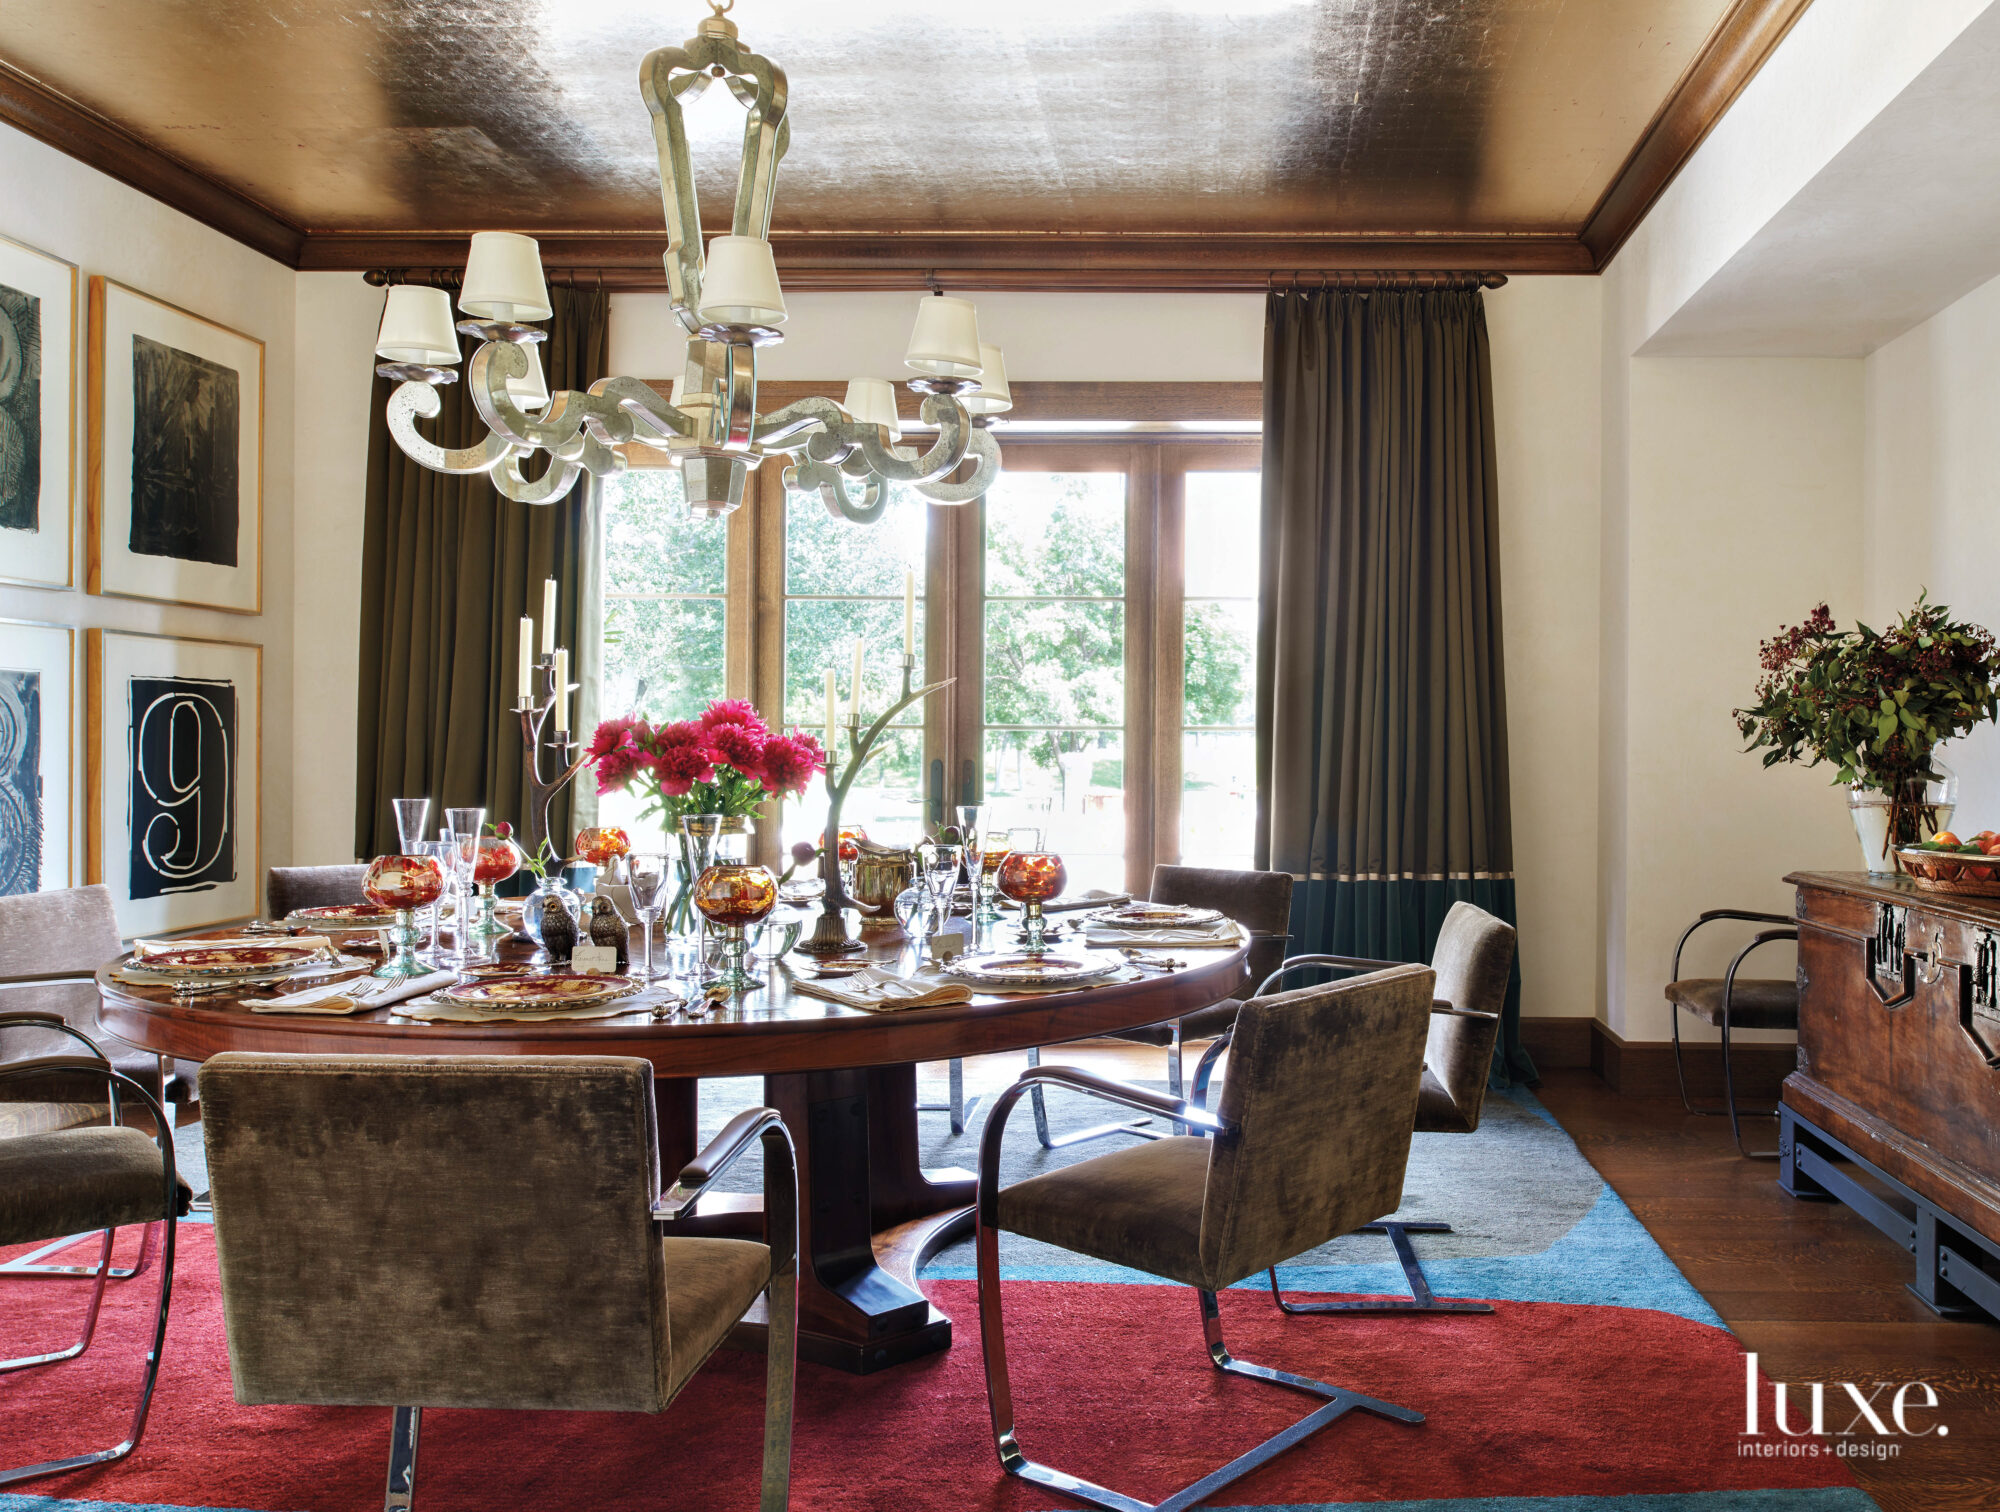 The dining room features a round table, modern chairs and a gilded ceiling.